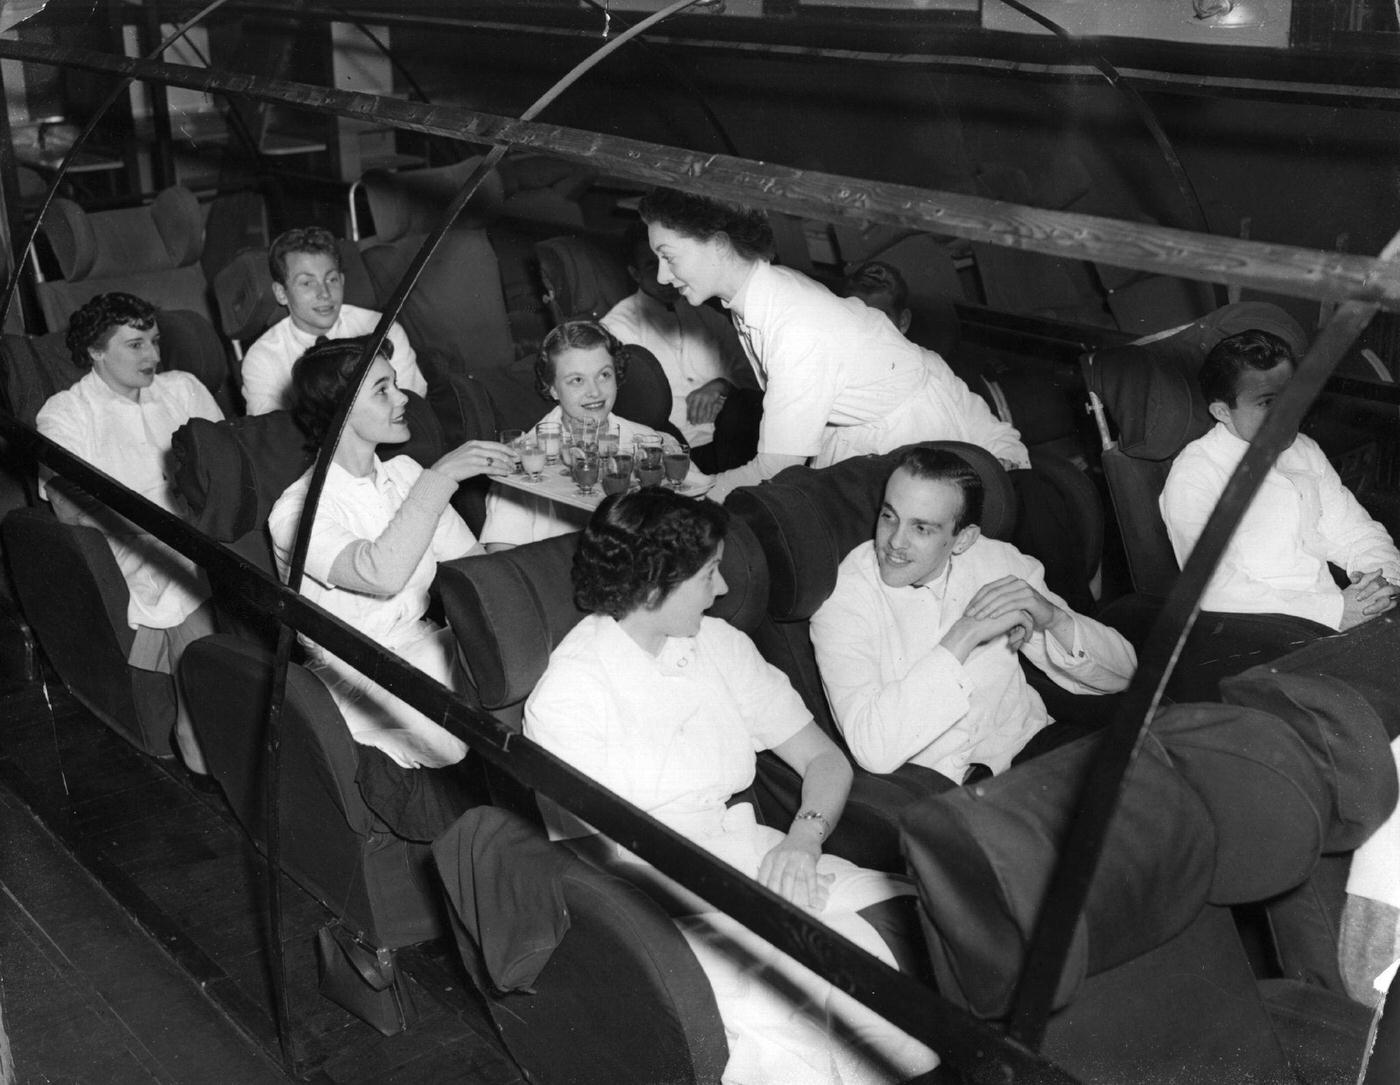 Trainee BOAC cabin crew members simulate being passengers in a replica of a Hermes aircraft during their training near Heston Airport, Middlesex, in 1958.